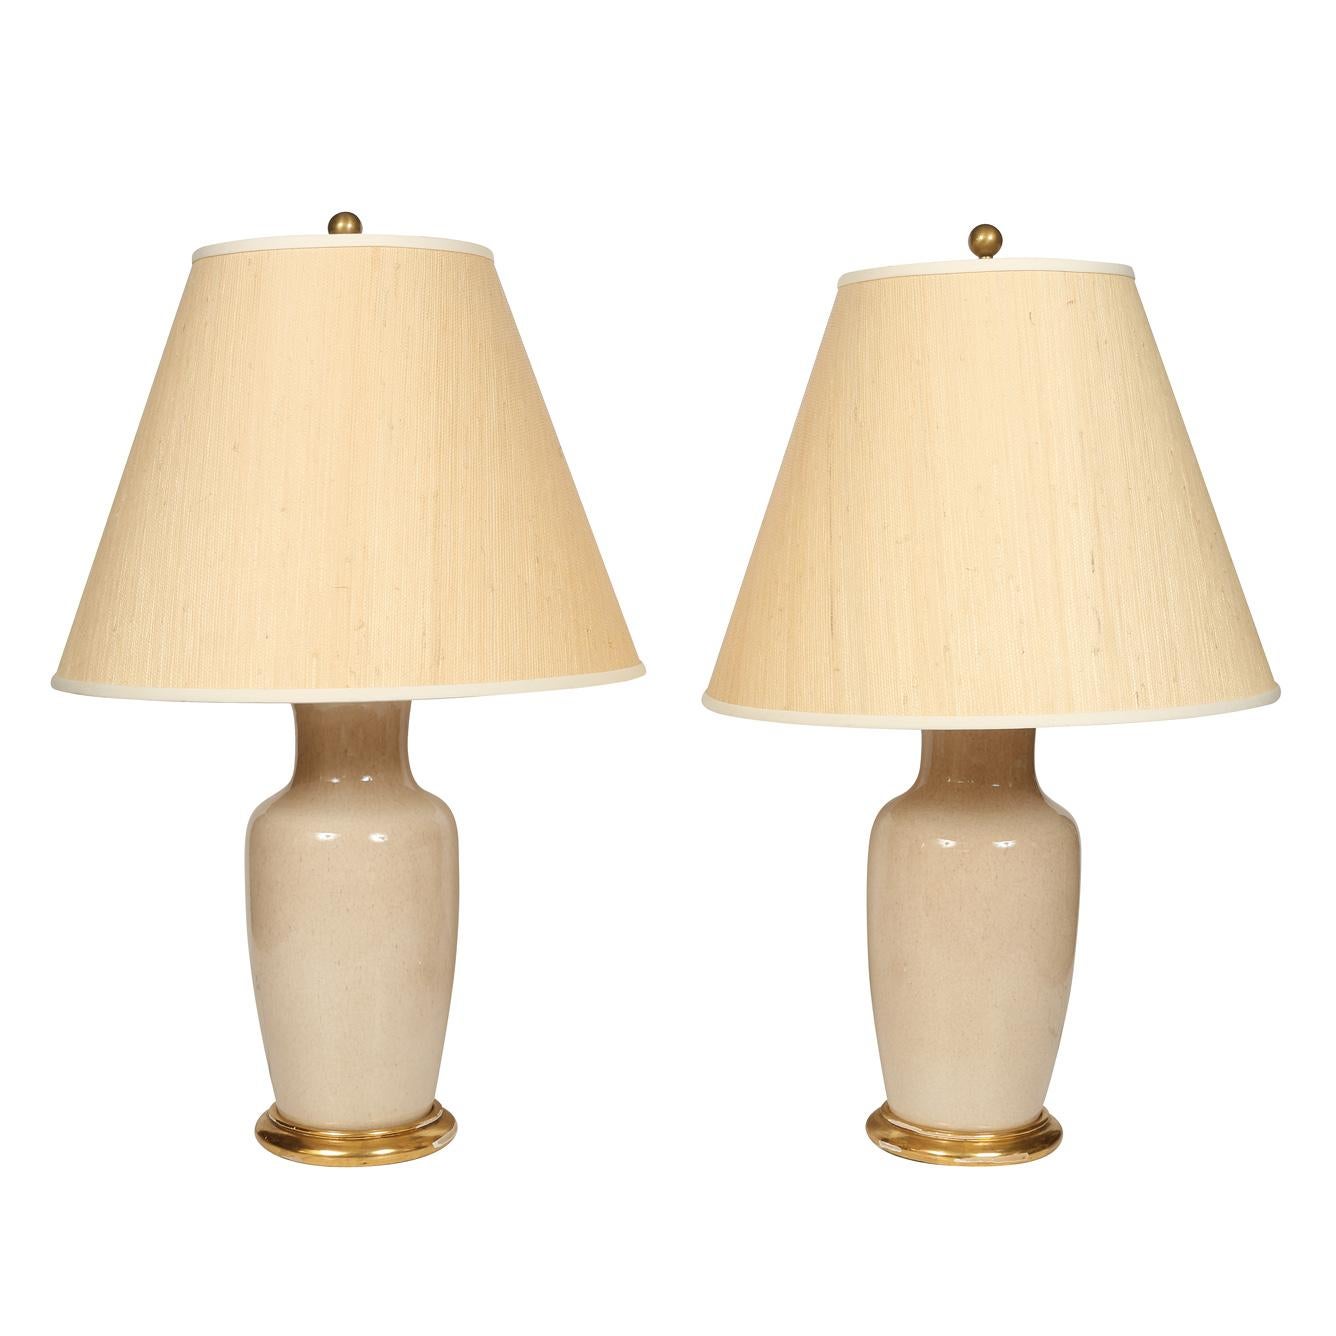 A pair of custom cream porcelain lamps with gilt bases.